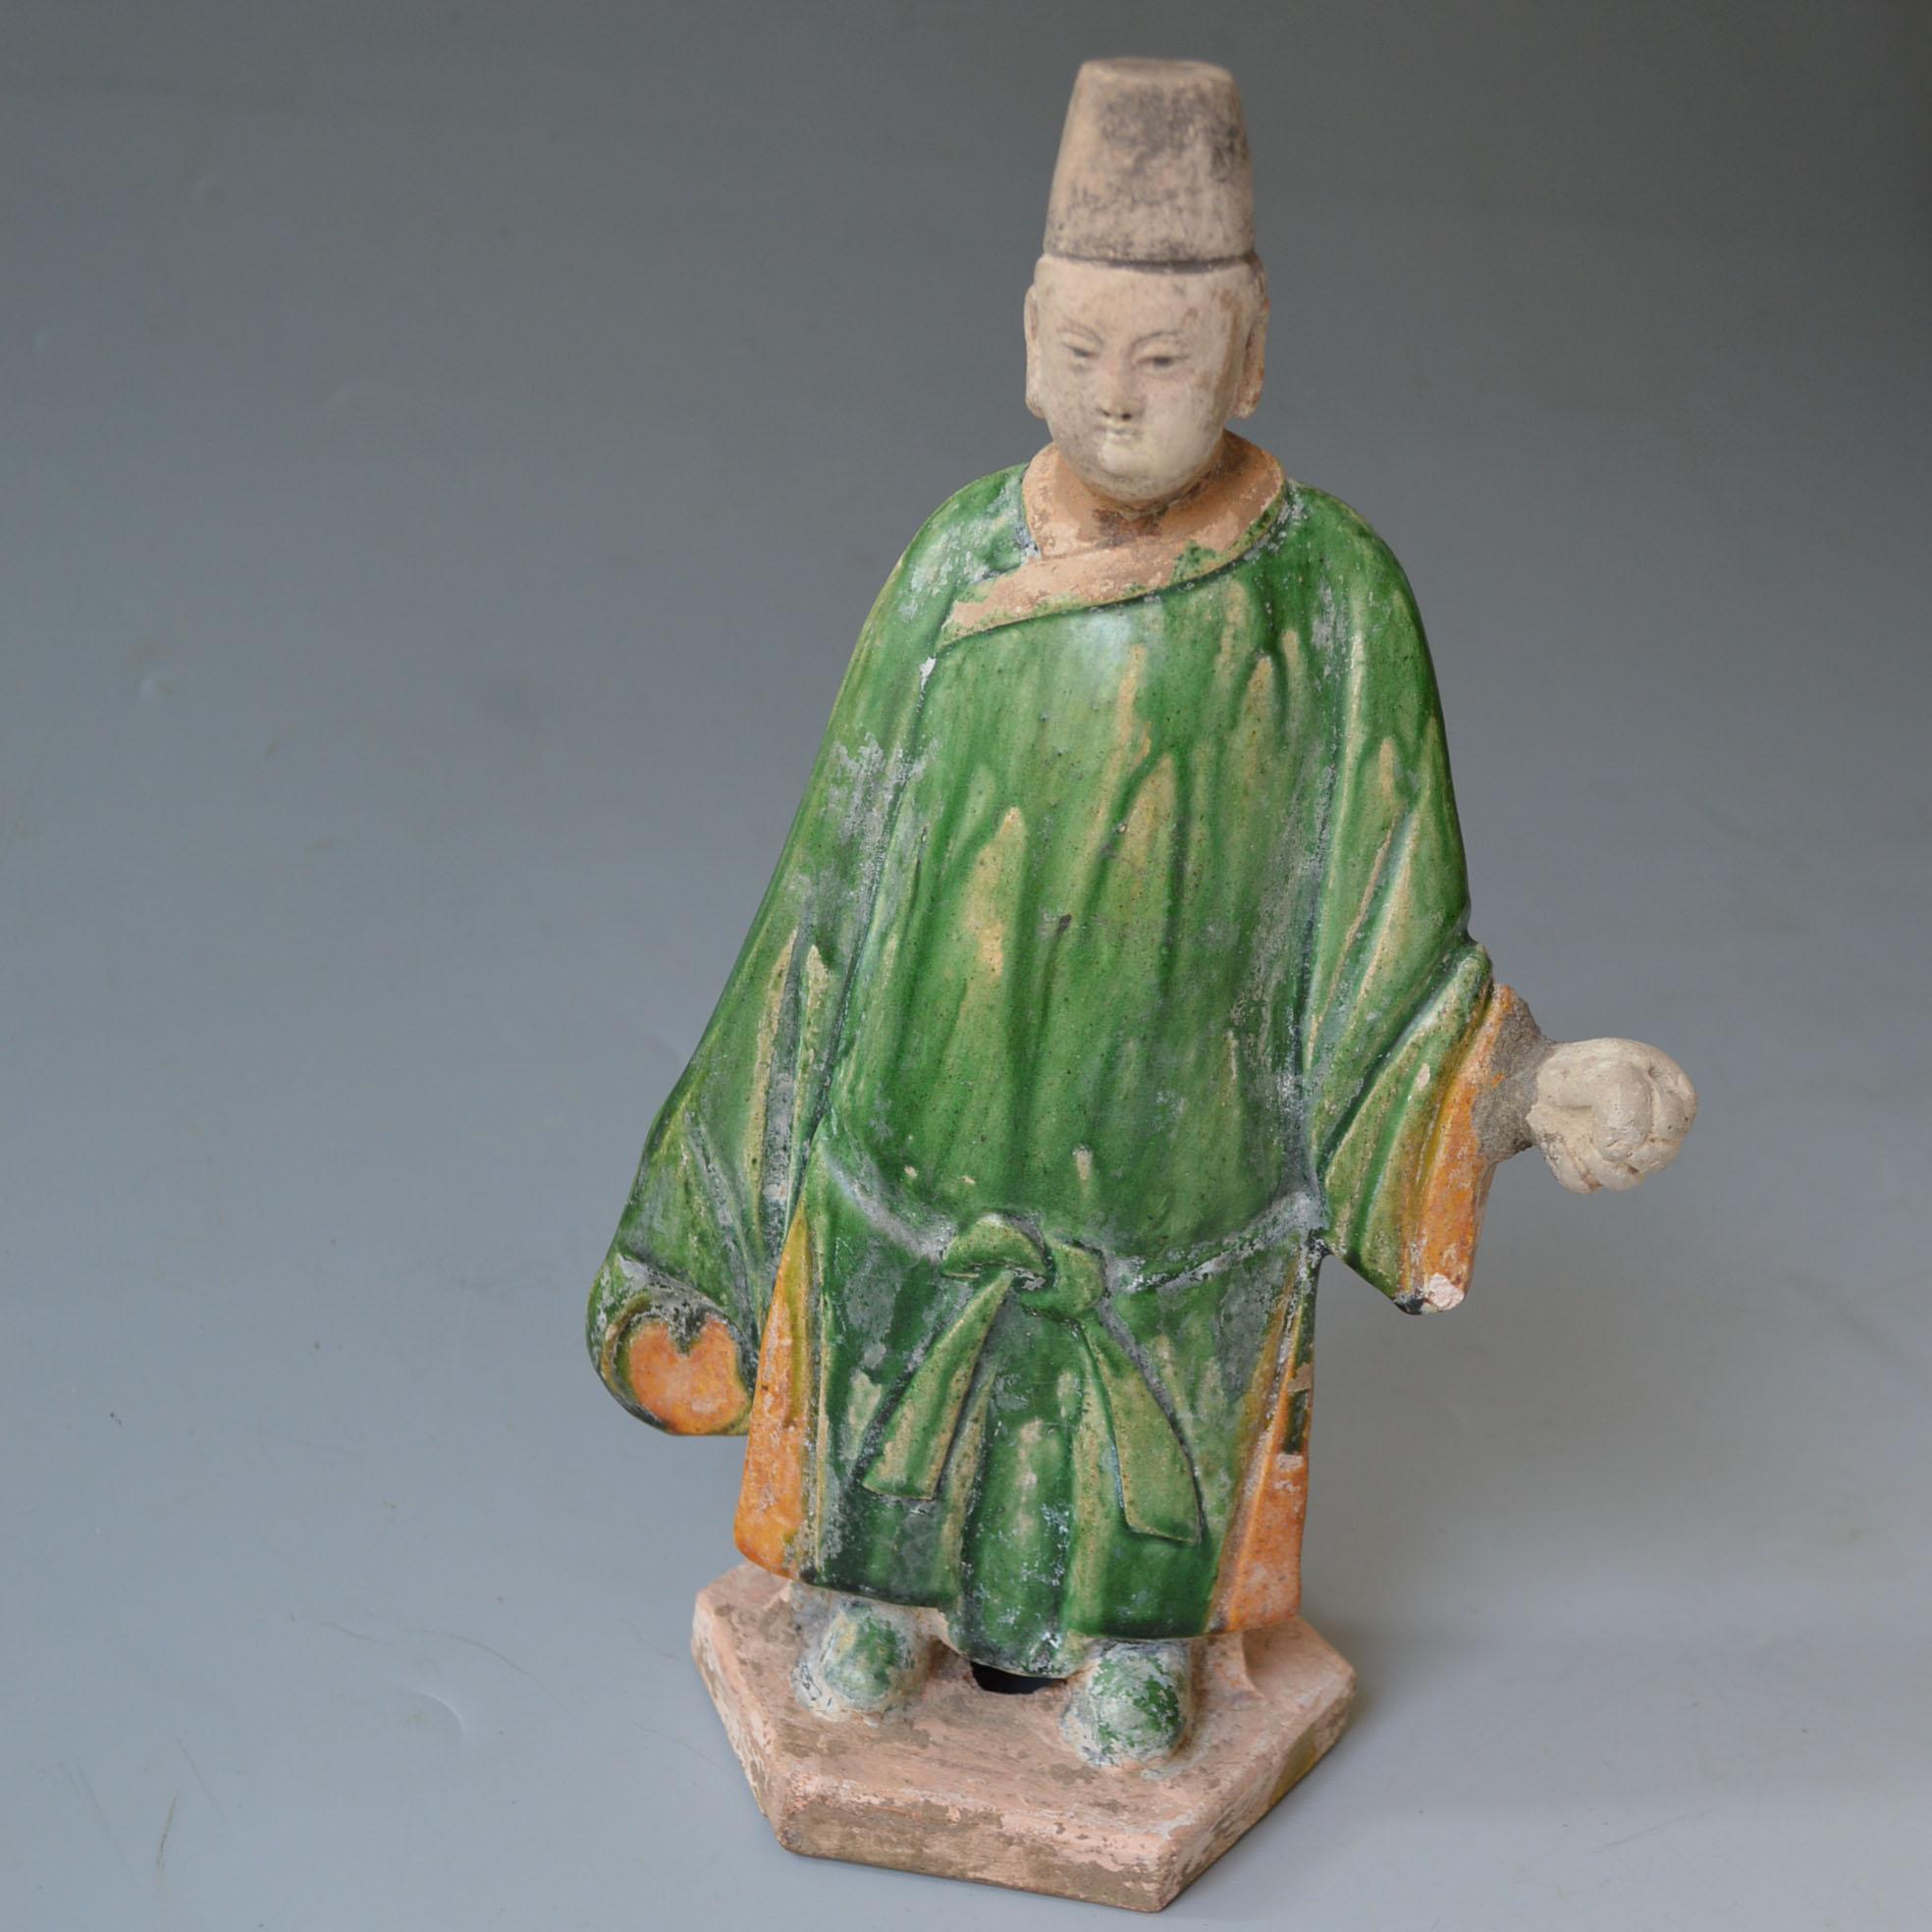 Chinese Antique Ming Dynasty glazed pottery figure  Ming Dynasty circa (14-16 century AD) China,

The earthenware with green and yellow glaze

Measures: height 28 cm, width 20 cm

Condition: head hand re-attached no restorations.
 